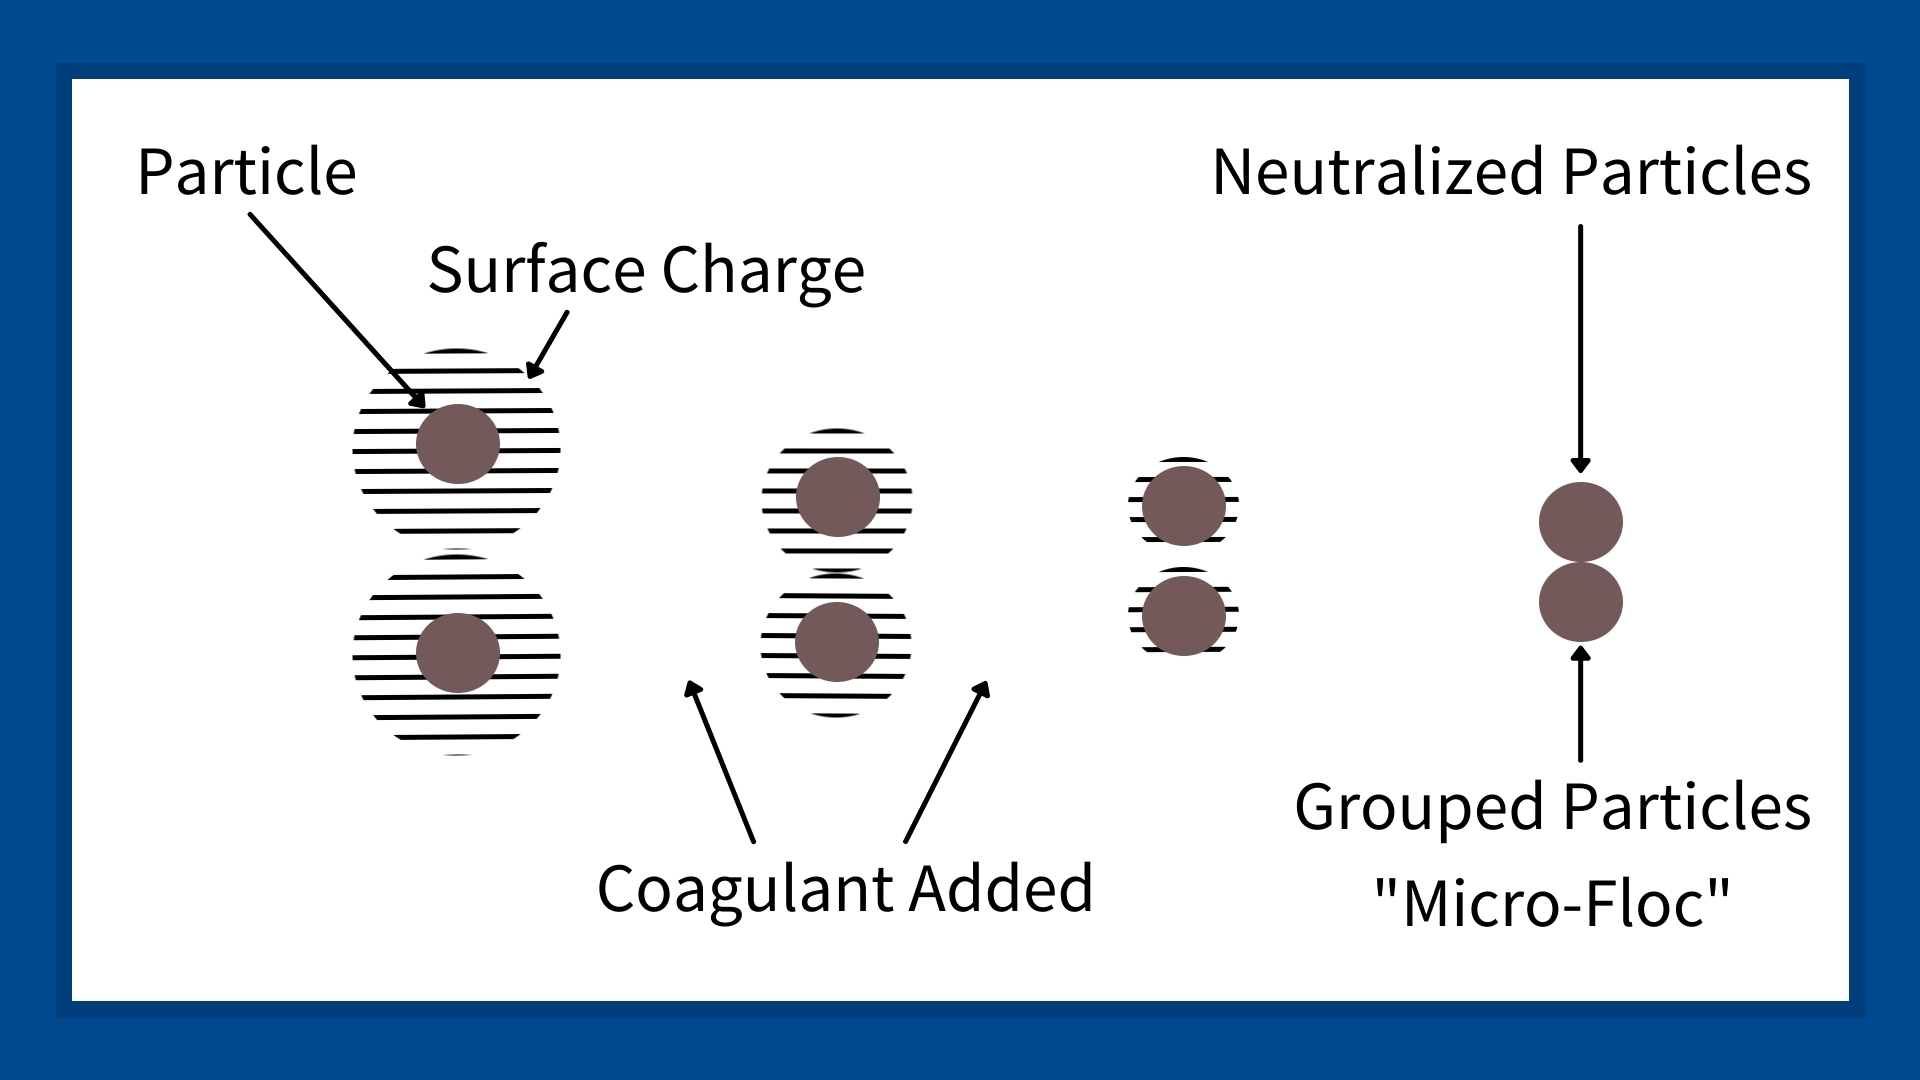 This image shows negatively charged liquid-suspended particles being neutralized with a coagulant. It shows how the particles slowly lose their negative charge and come together to form a larger particle.